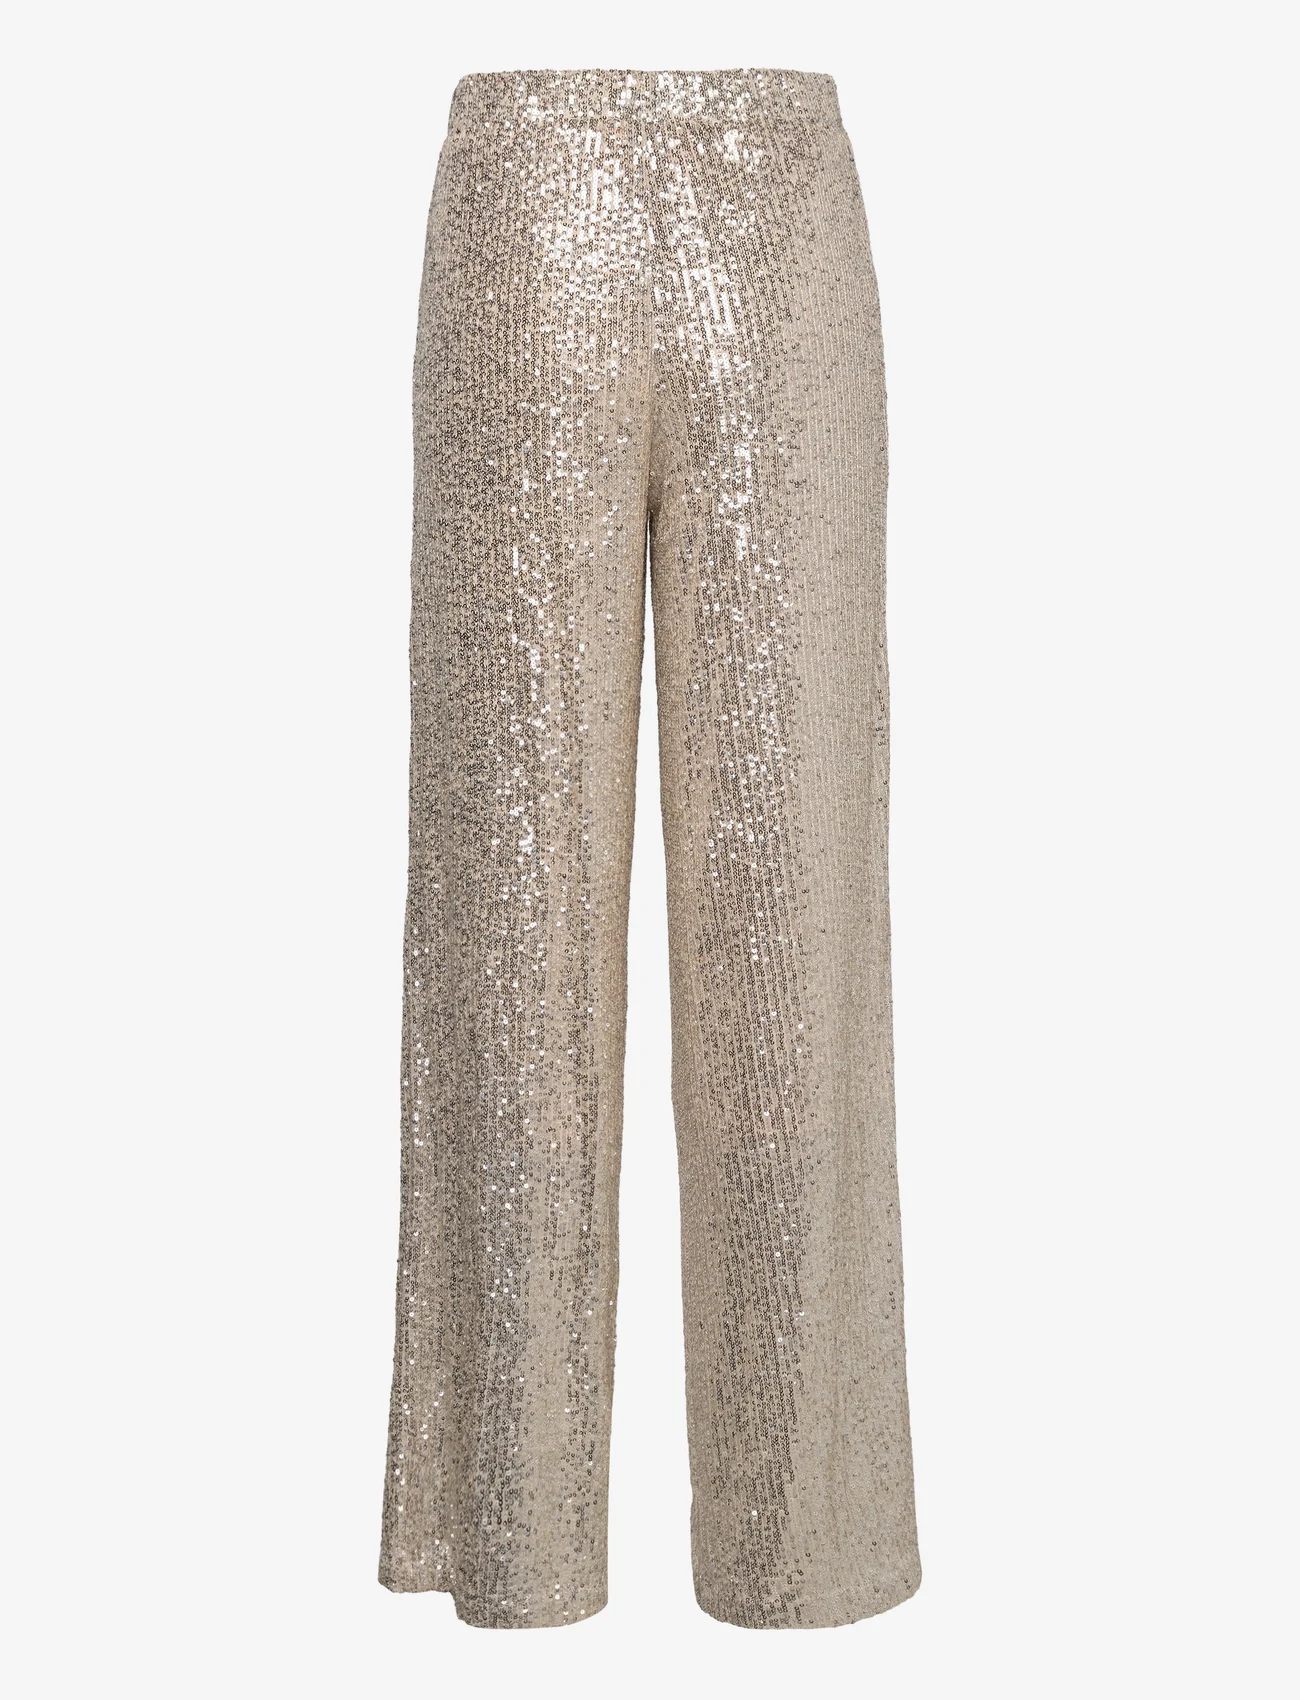 2NDDAY - 2ND Edition Soma - Sensual Glam - straight leg trousers - 14000 silver - 1